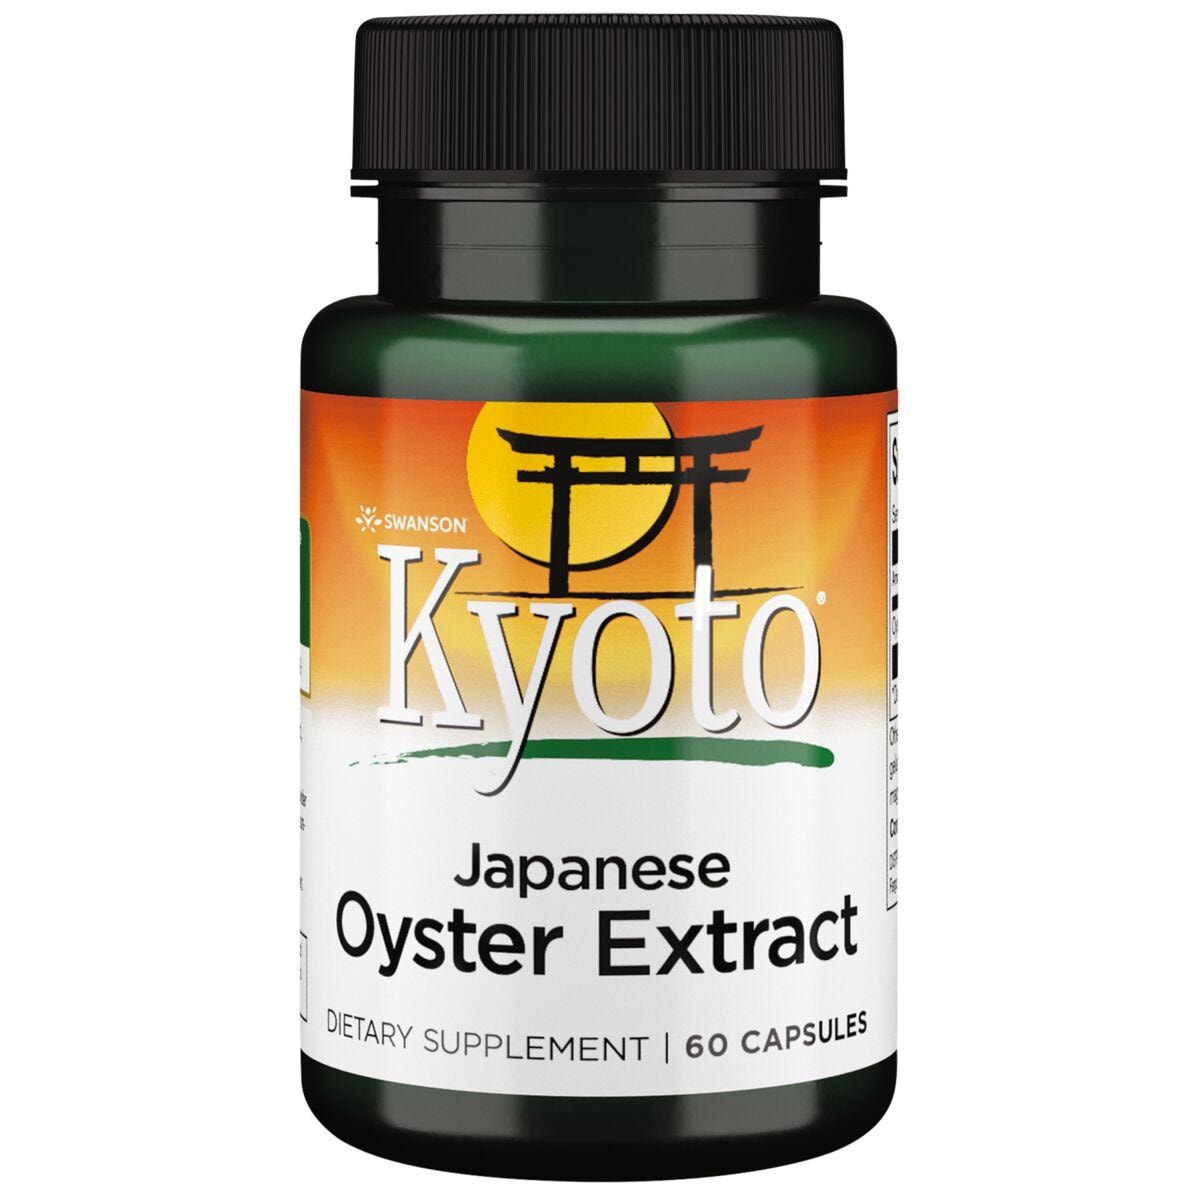 Swanson Kyoto Brand Japanese Oyster Extract Vitamin | 500 mg | 60 Caps